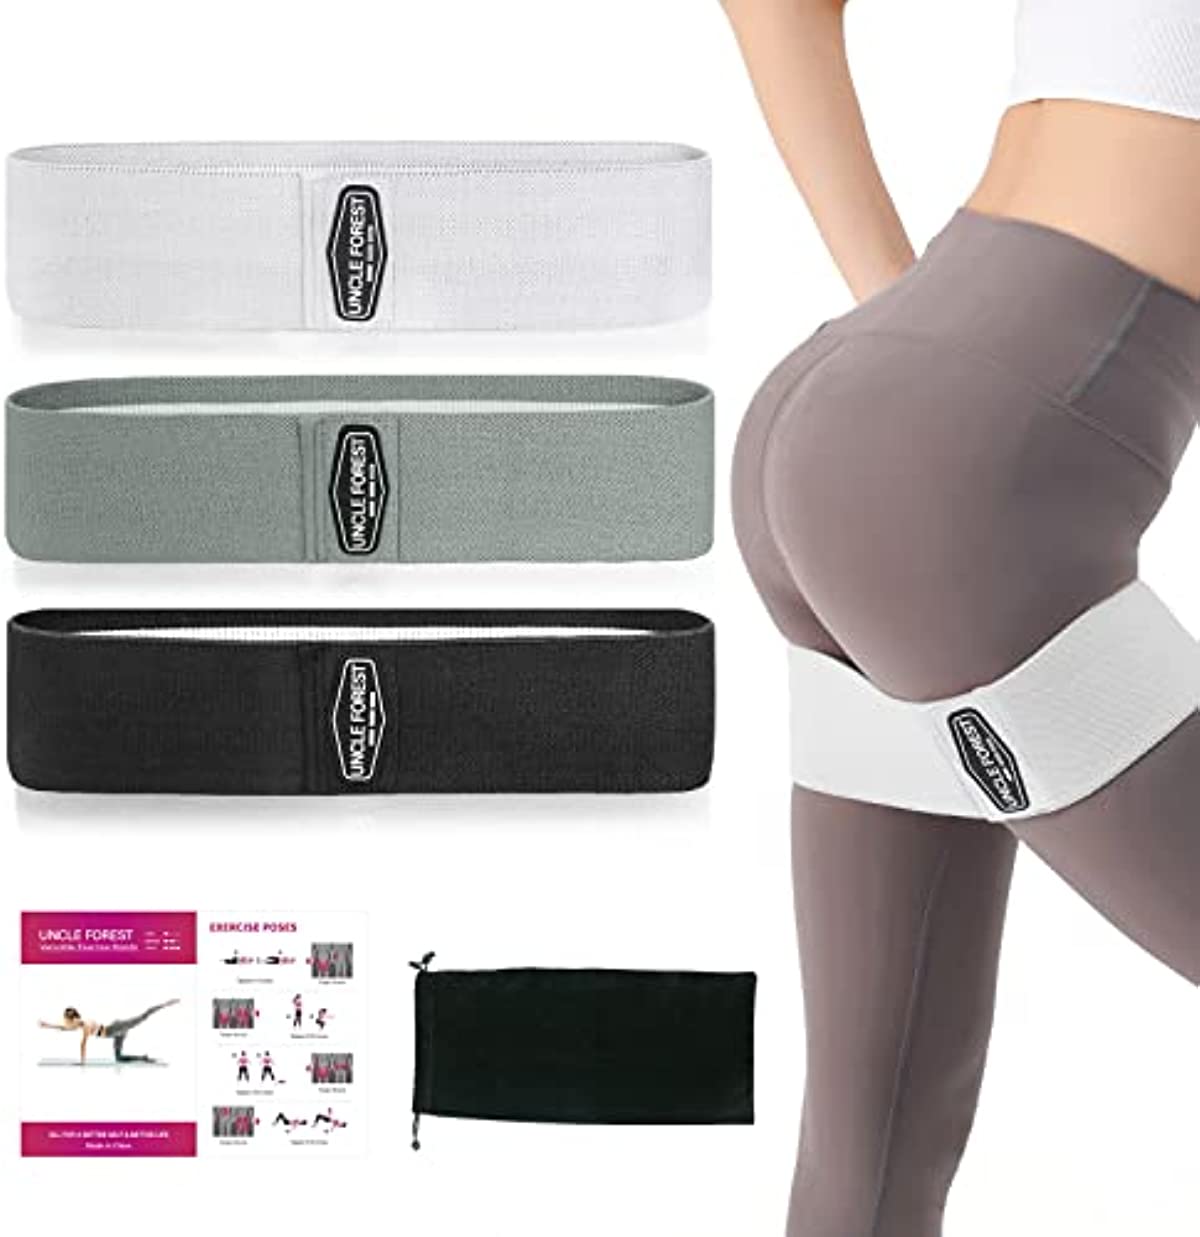 UNCLEFOREST Fabric Resistance Bands for Working Out, 3 Levels Resistance Bands for Legs with Storage Bag, Non-Slip Hip Booty Bands Perfect for Yoga, Pilates, Rehab, Fitness